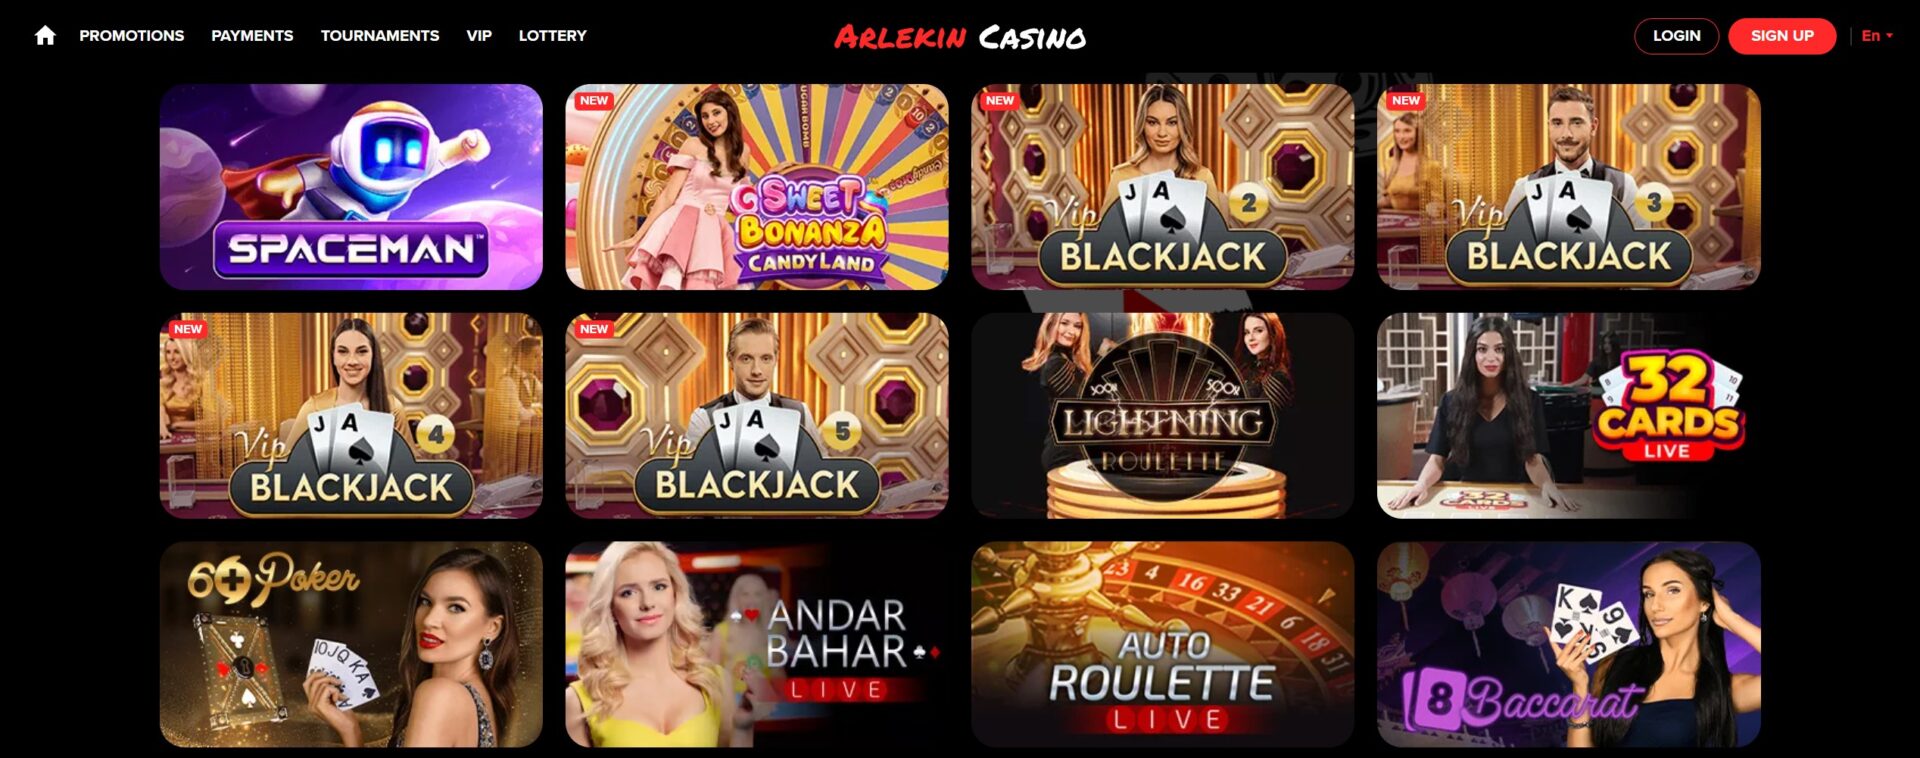 Arlekin Casino also offers a big selection of different live casino games